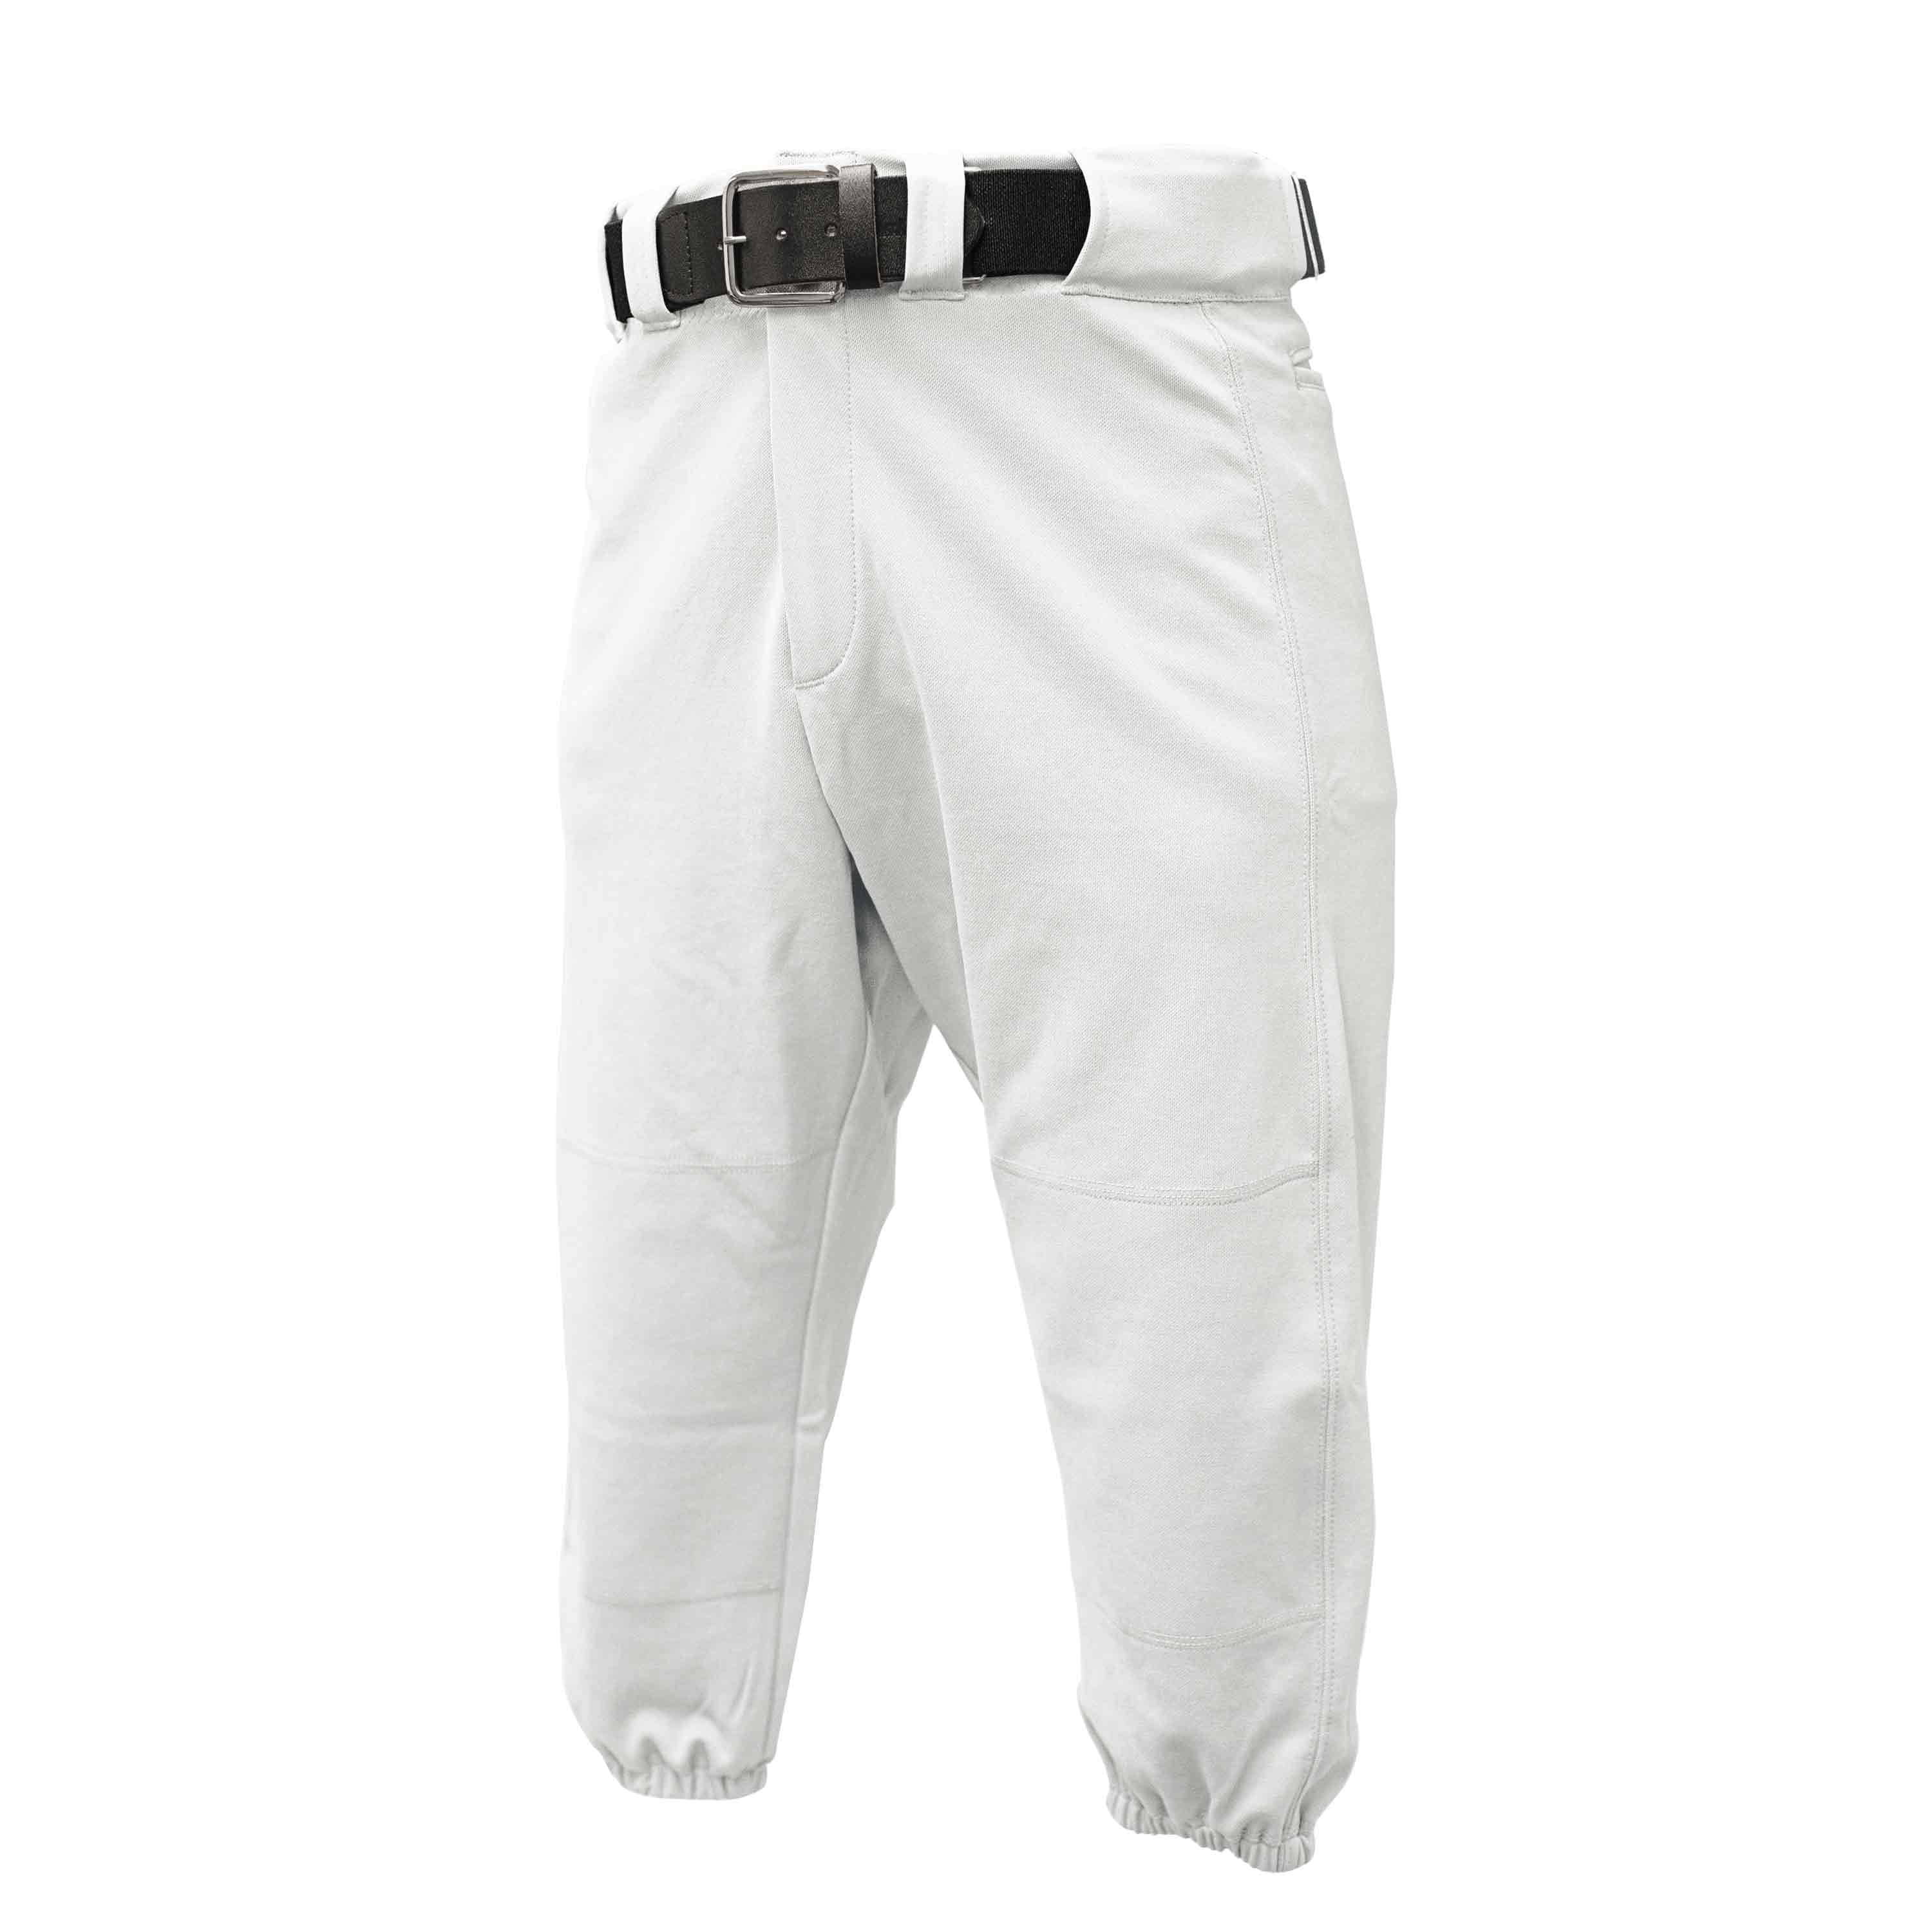 Franklin Sports 10355 Youth Classic Extra Small Fit Deluxe Baseball Pants White for sale online 